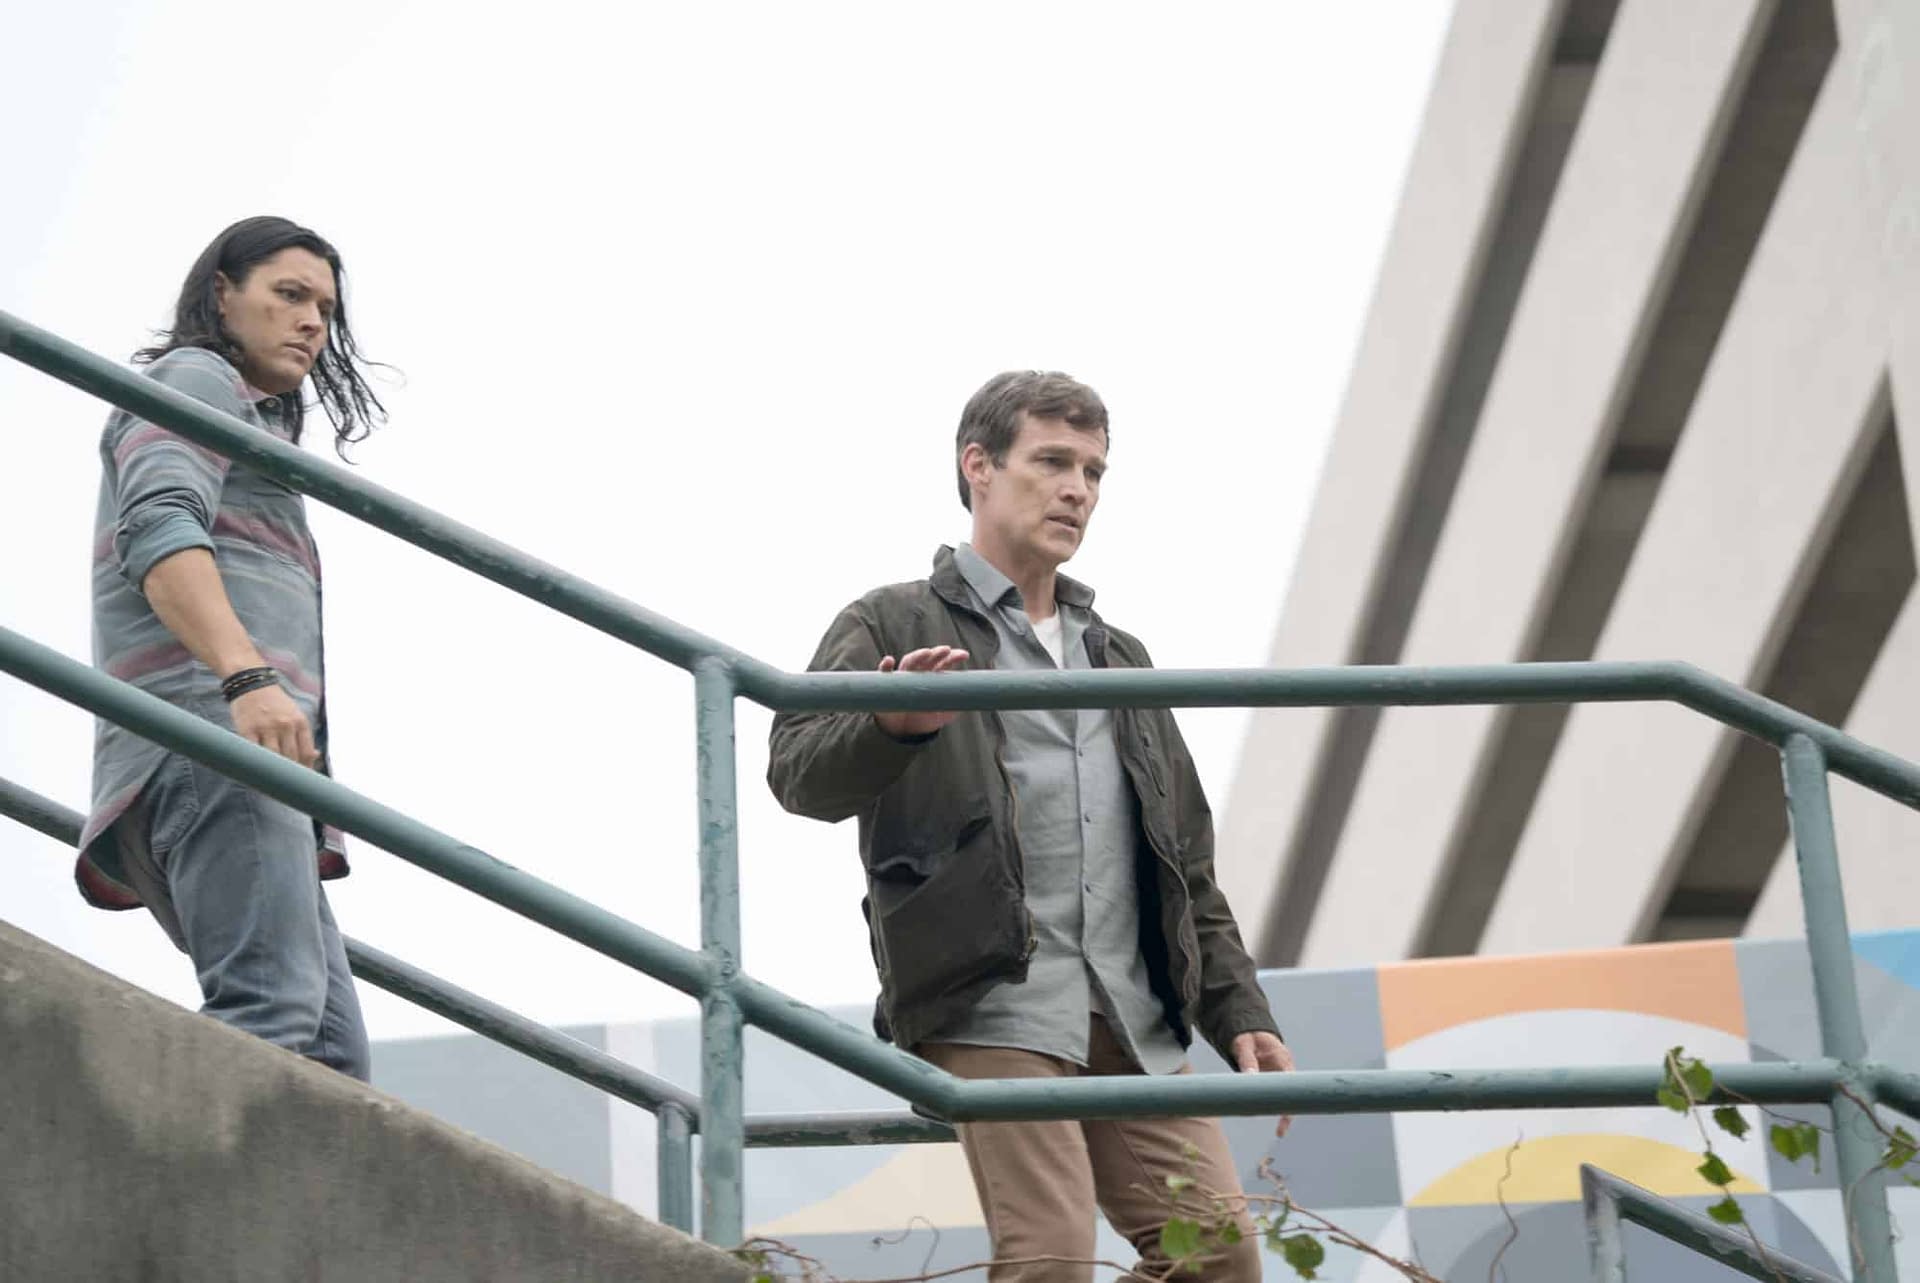 The Gifted Season 2 Episode 13: Images, Promo, and Summary